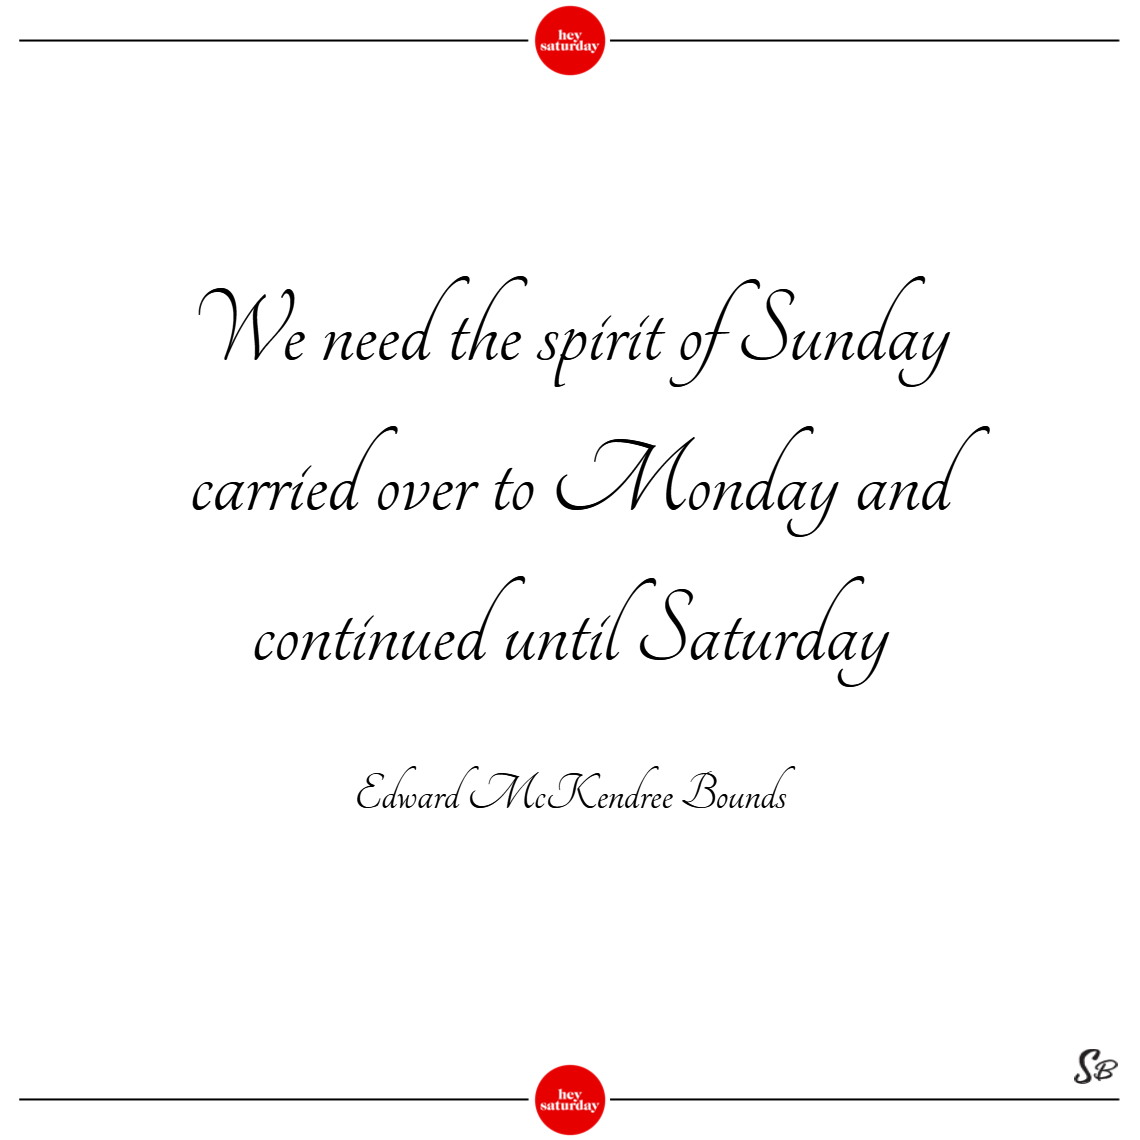 We need the spirit of sunday carried over to monday and continued until saturday. - edward mckendree bounds